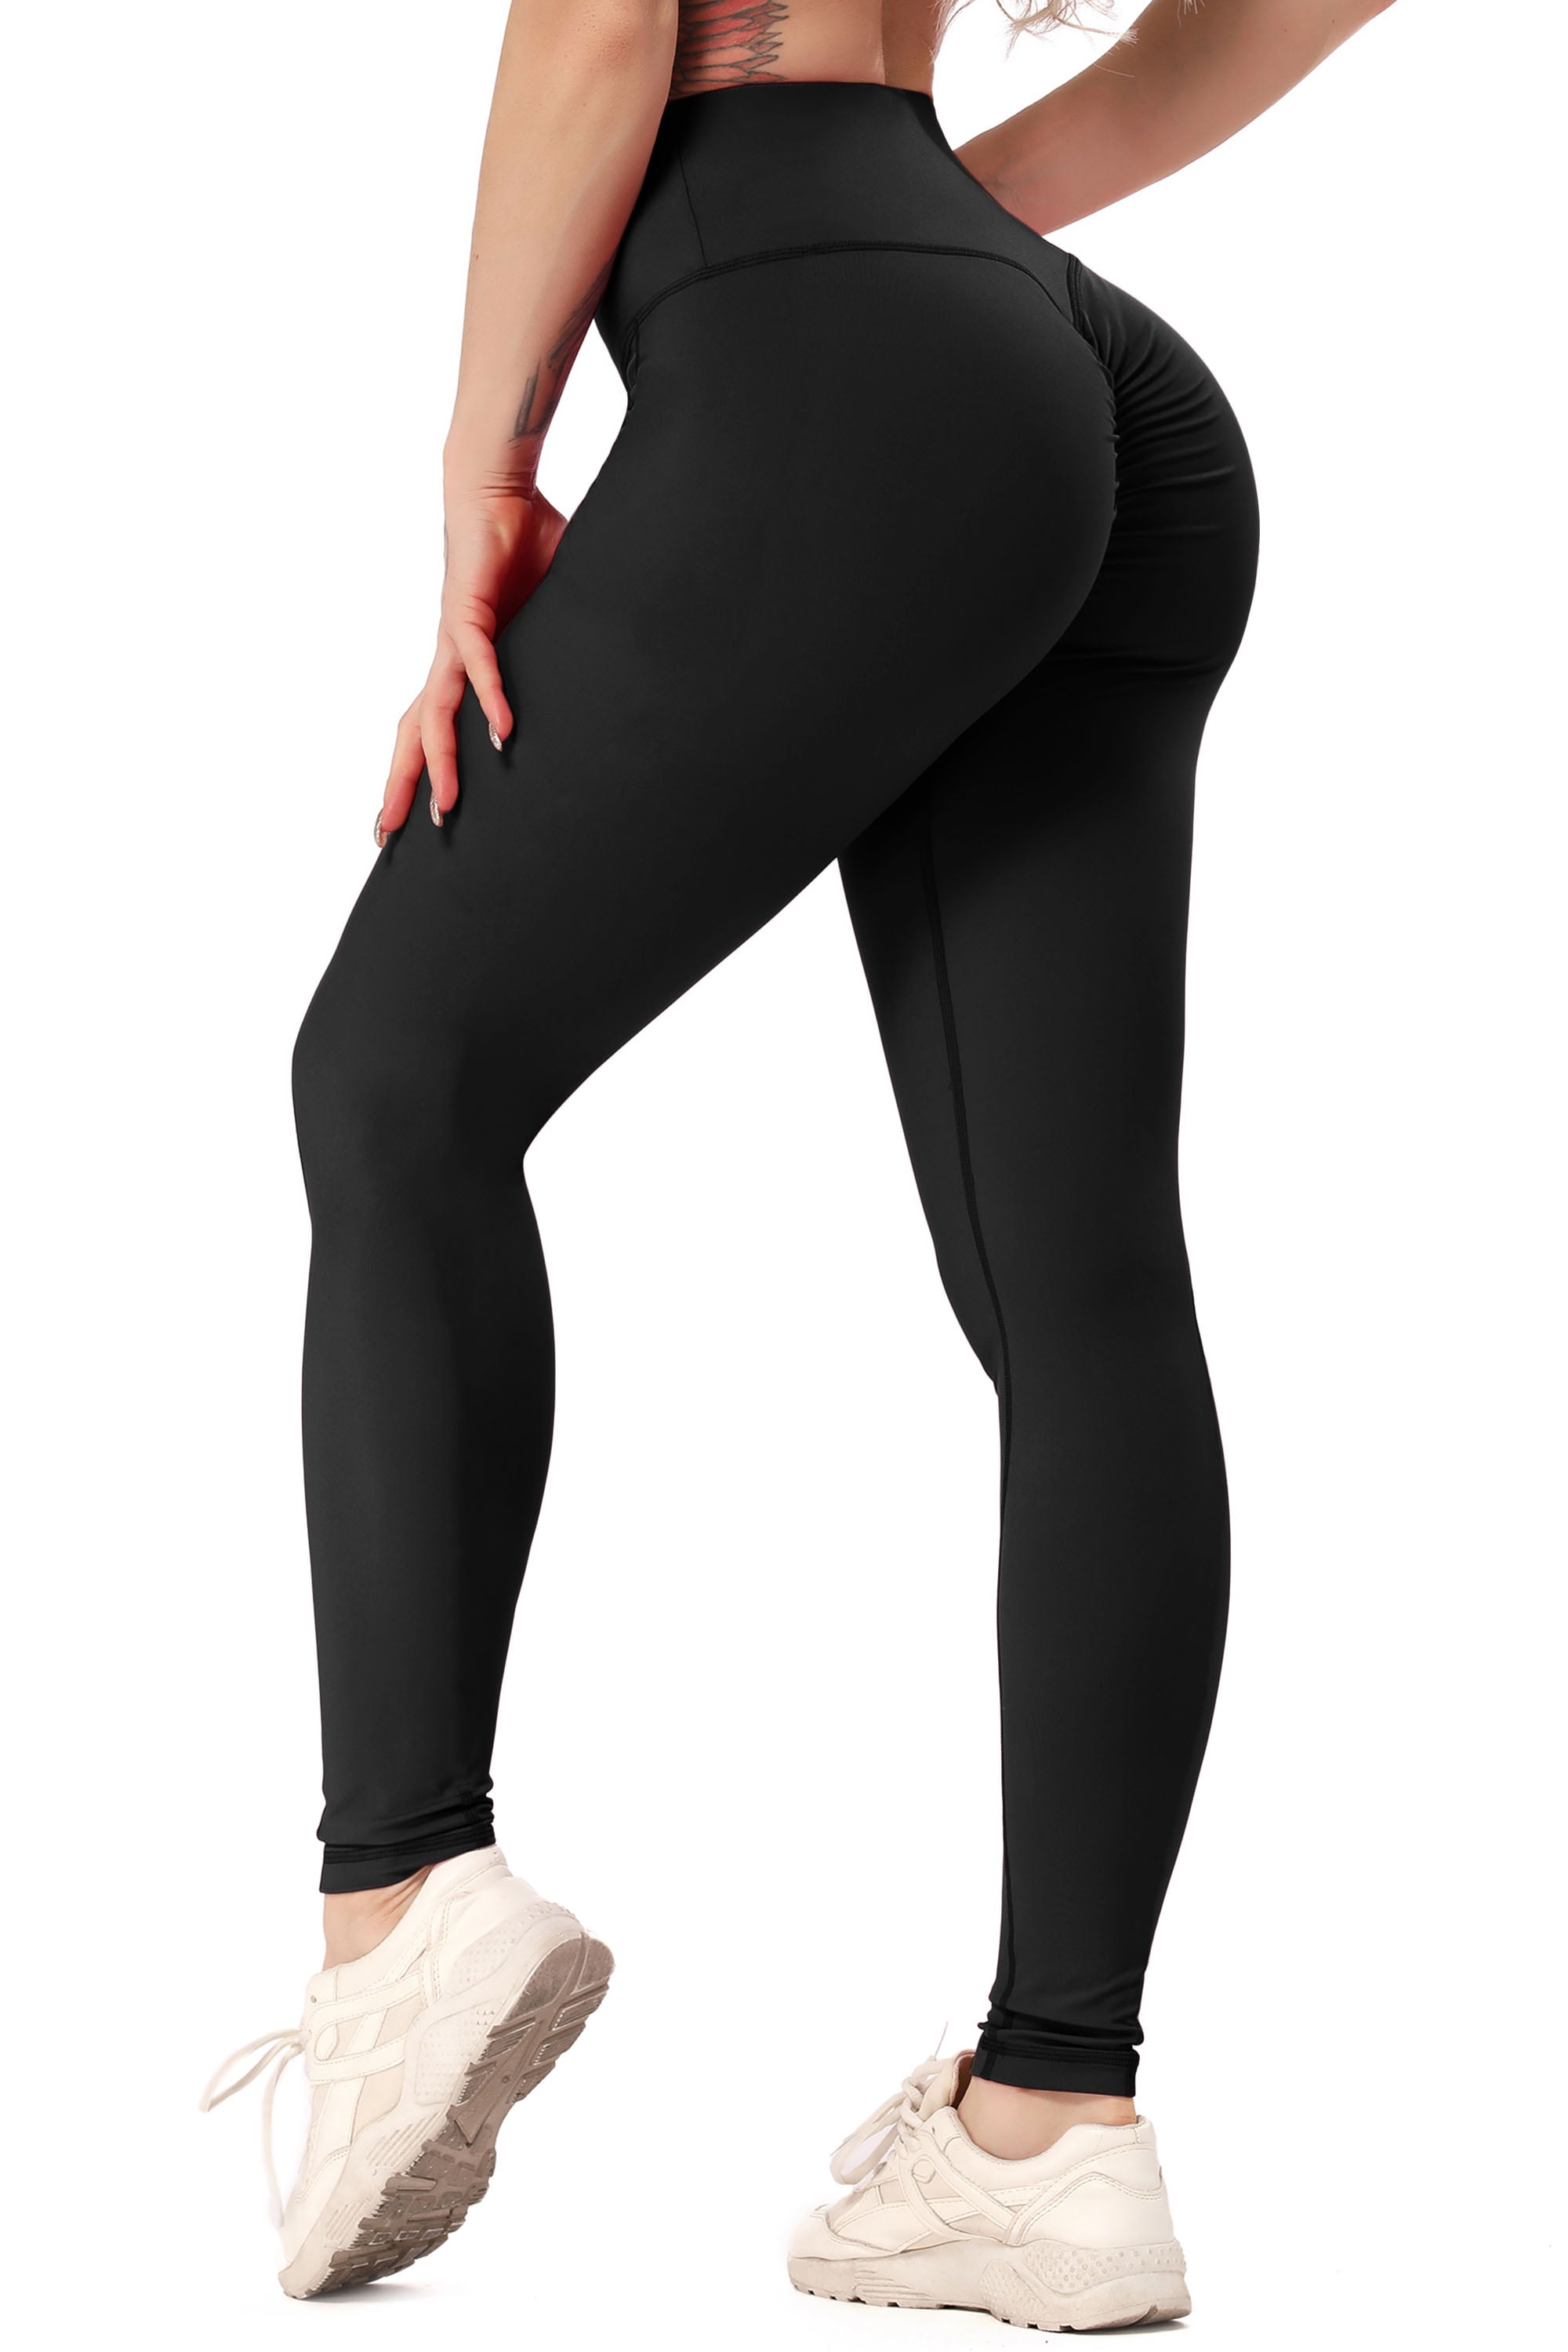 High Waist Fitness Leggings Womens Gym Workout Push Up Trousers Solid Yoga Pants